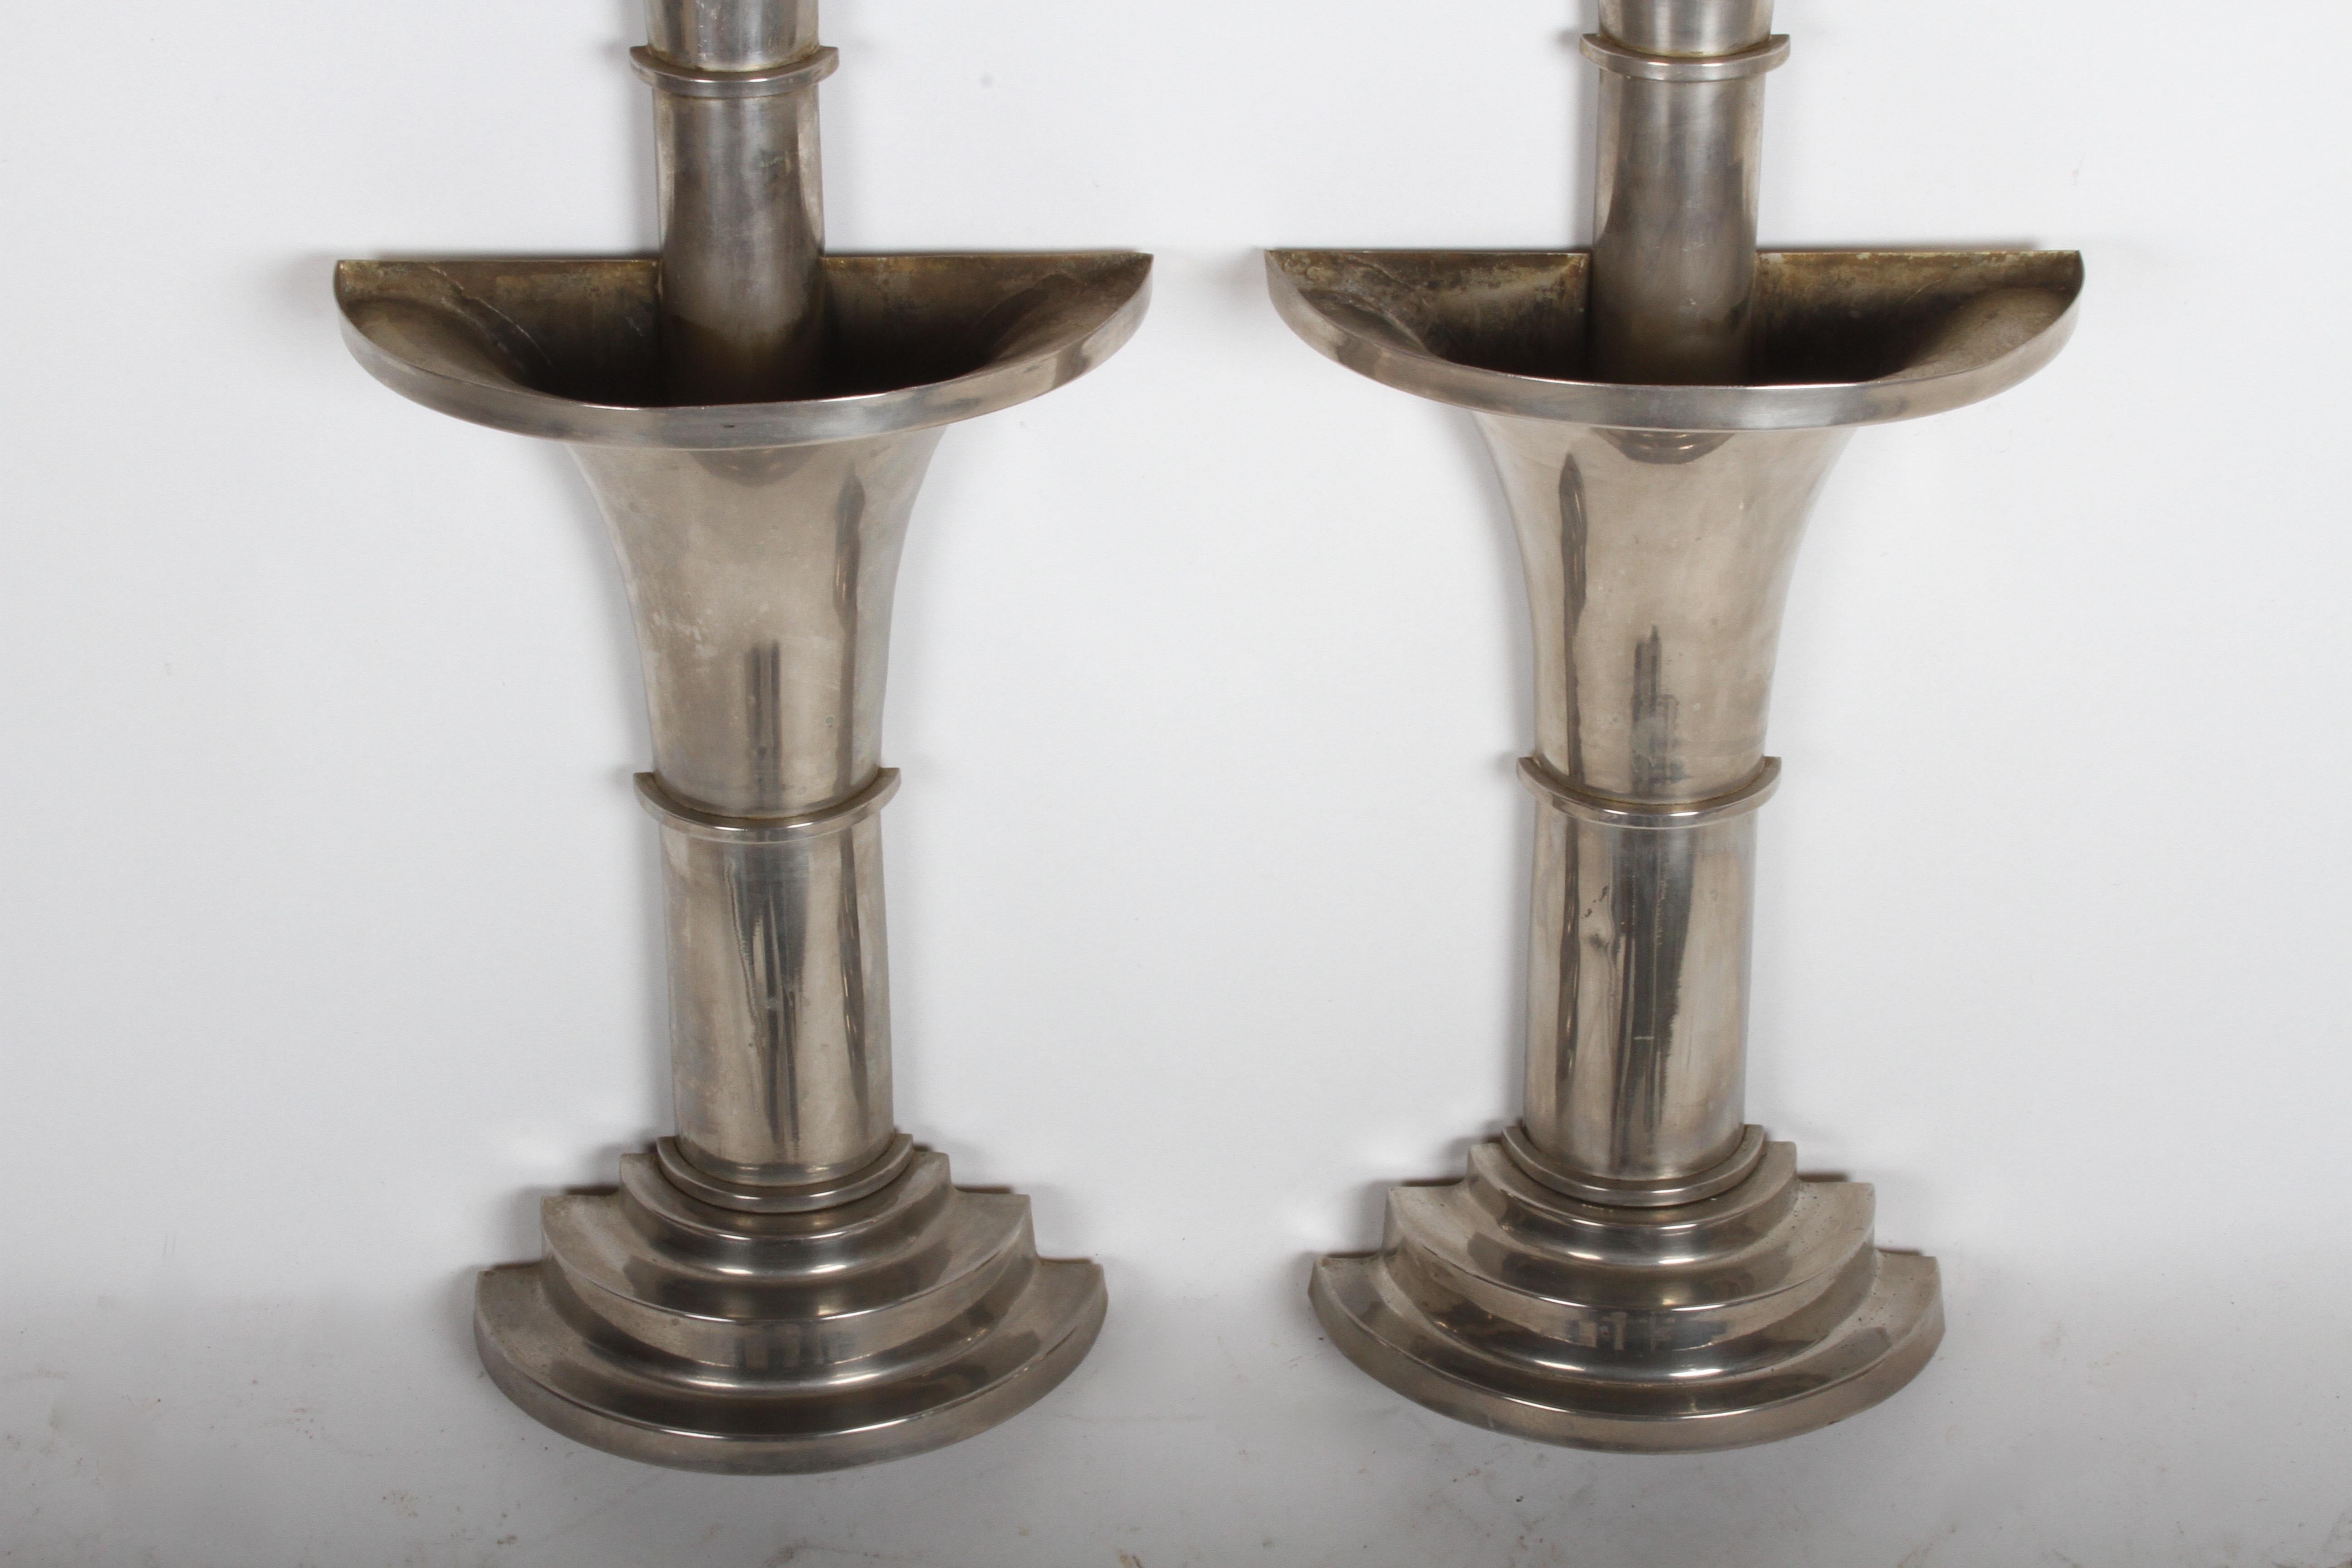 Pair of Nickel-Plated Art Deco Wall Floral Sconces For Sale 2